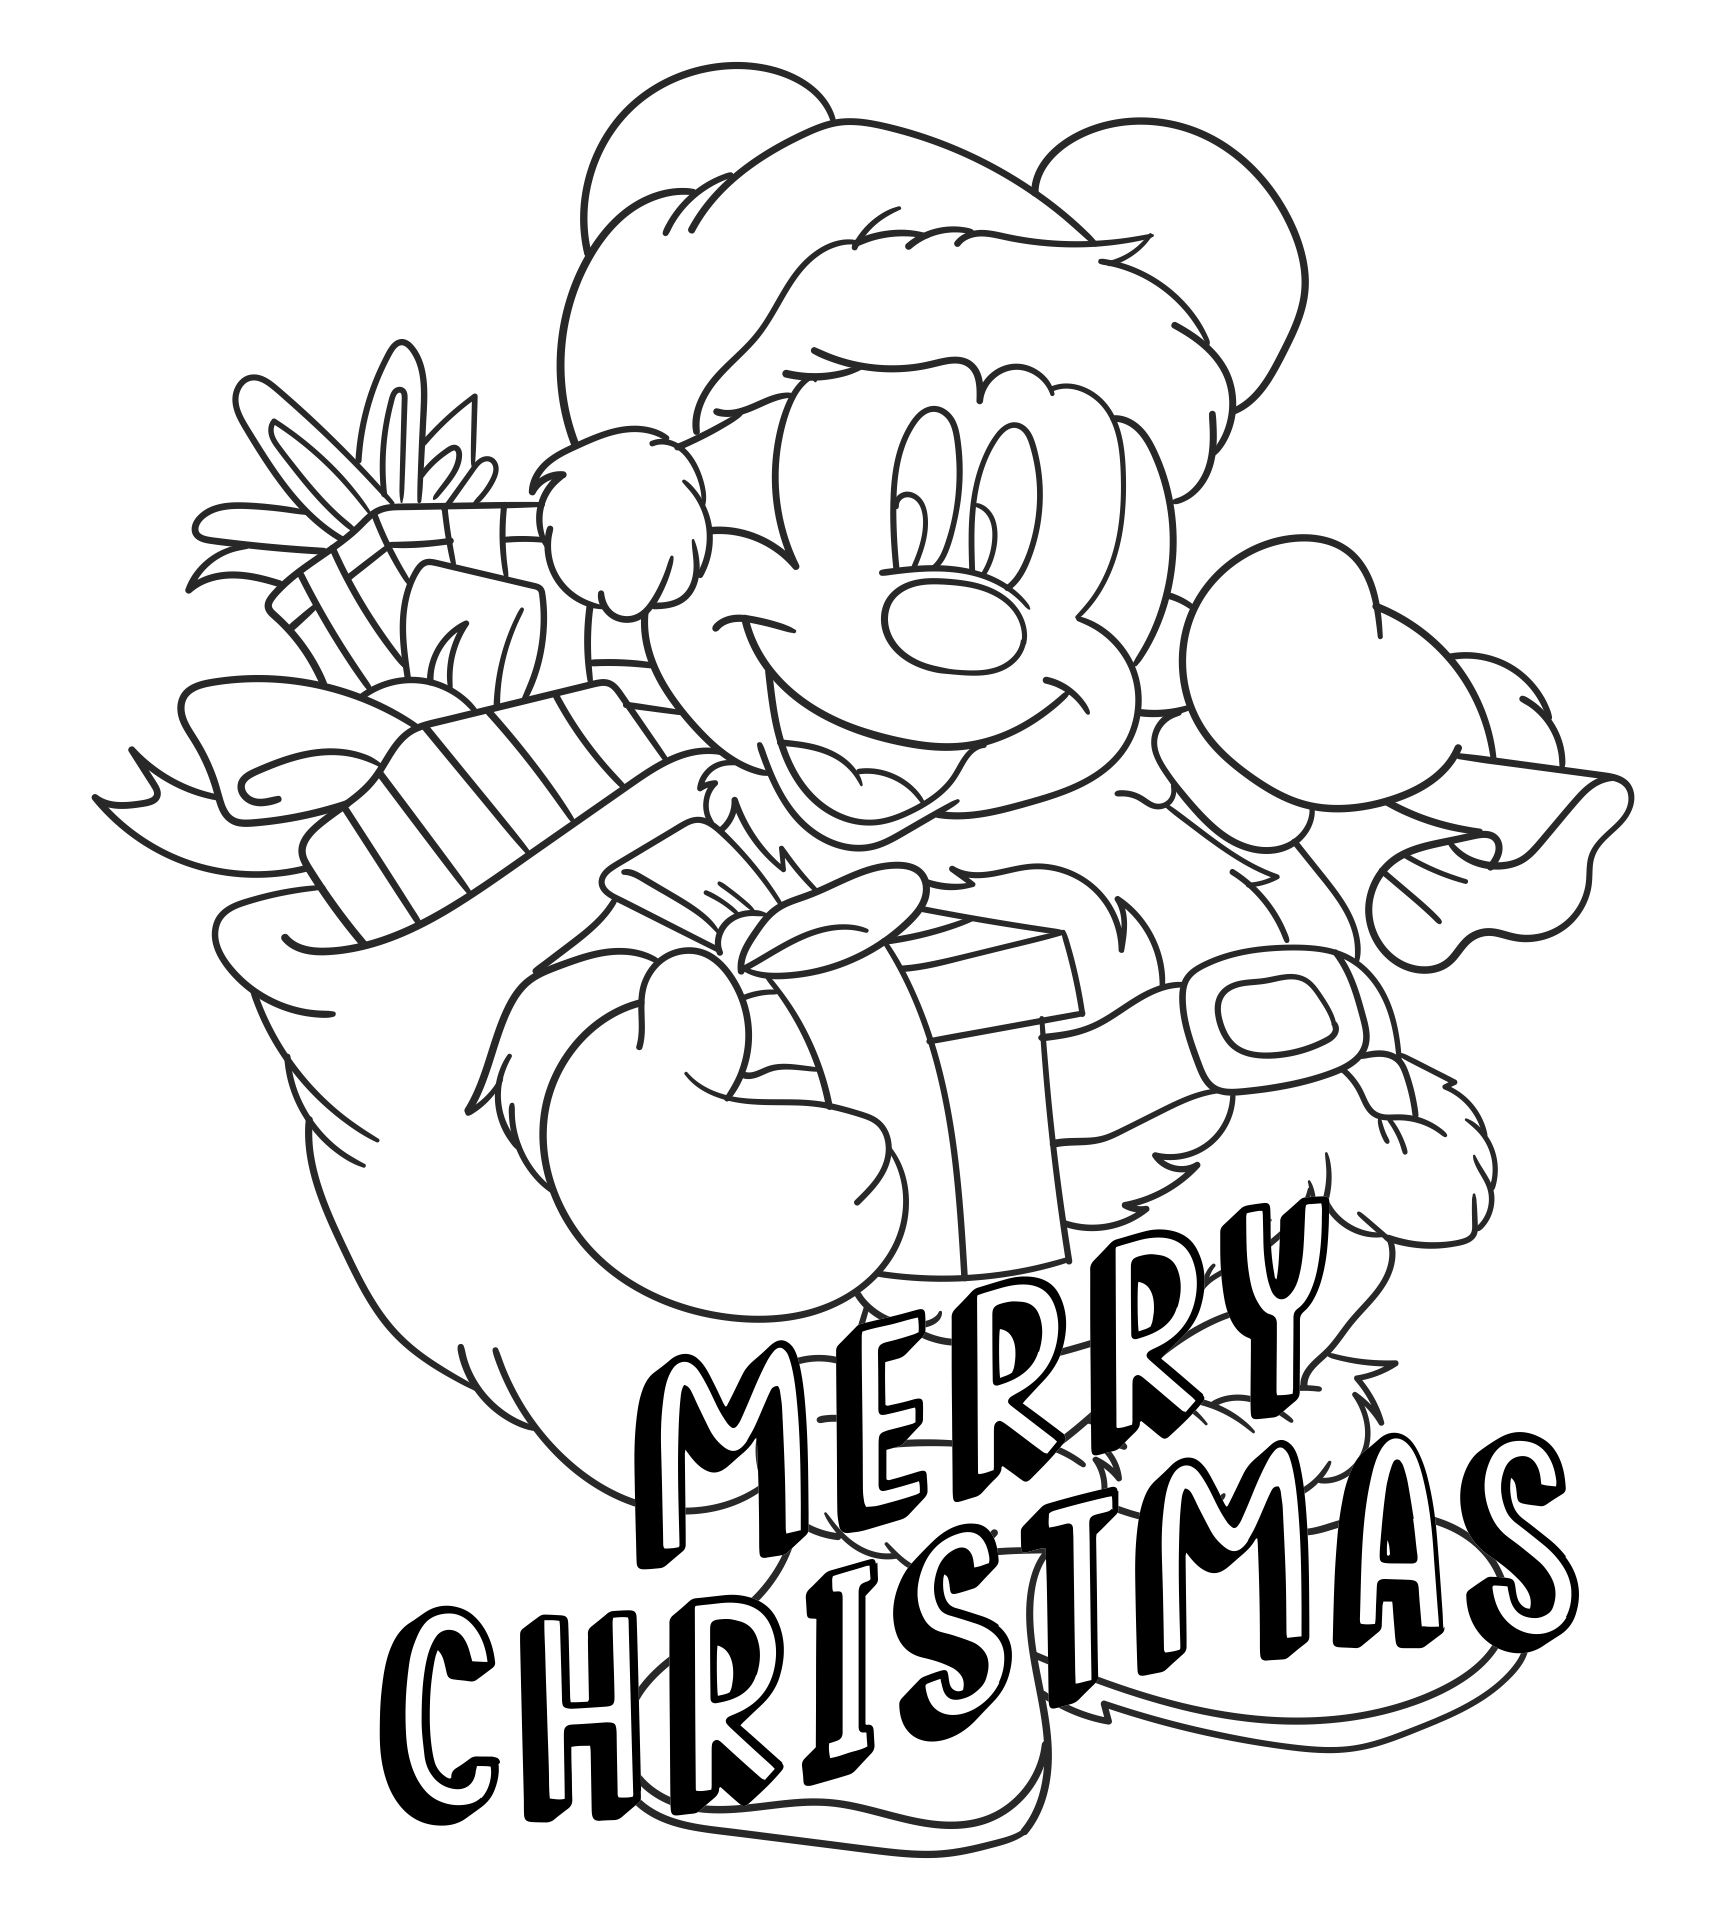 10 Best Printable Christmas Coloring Sheets Disney PDF For Free At Printablee